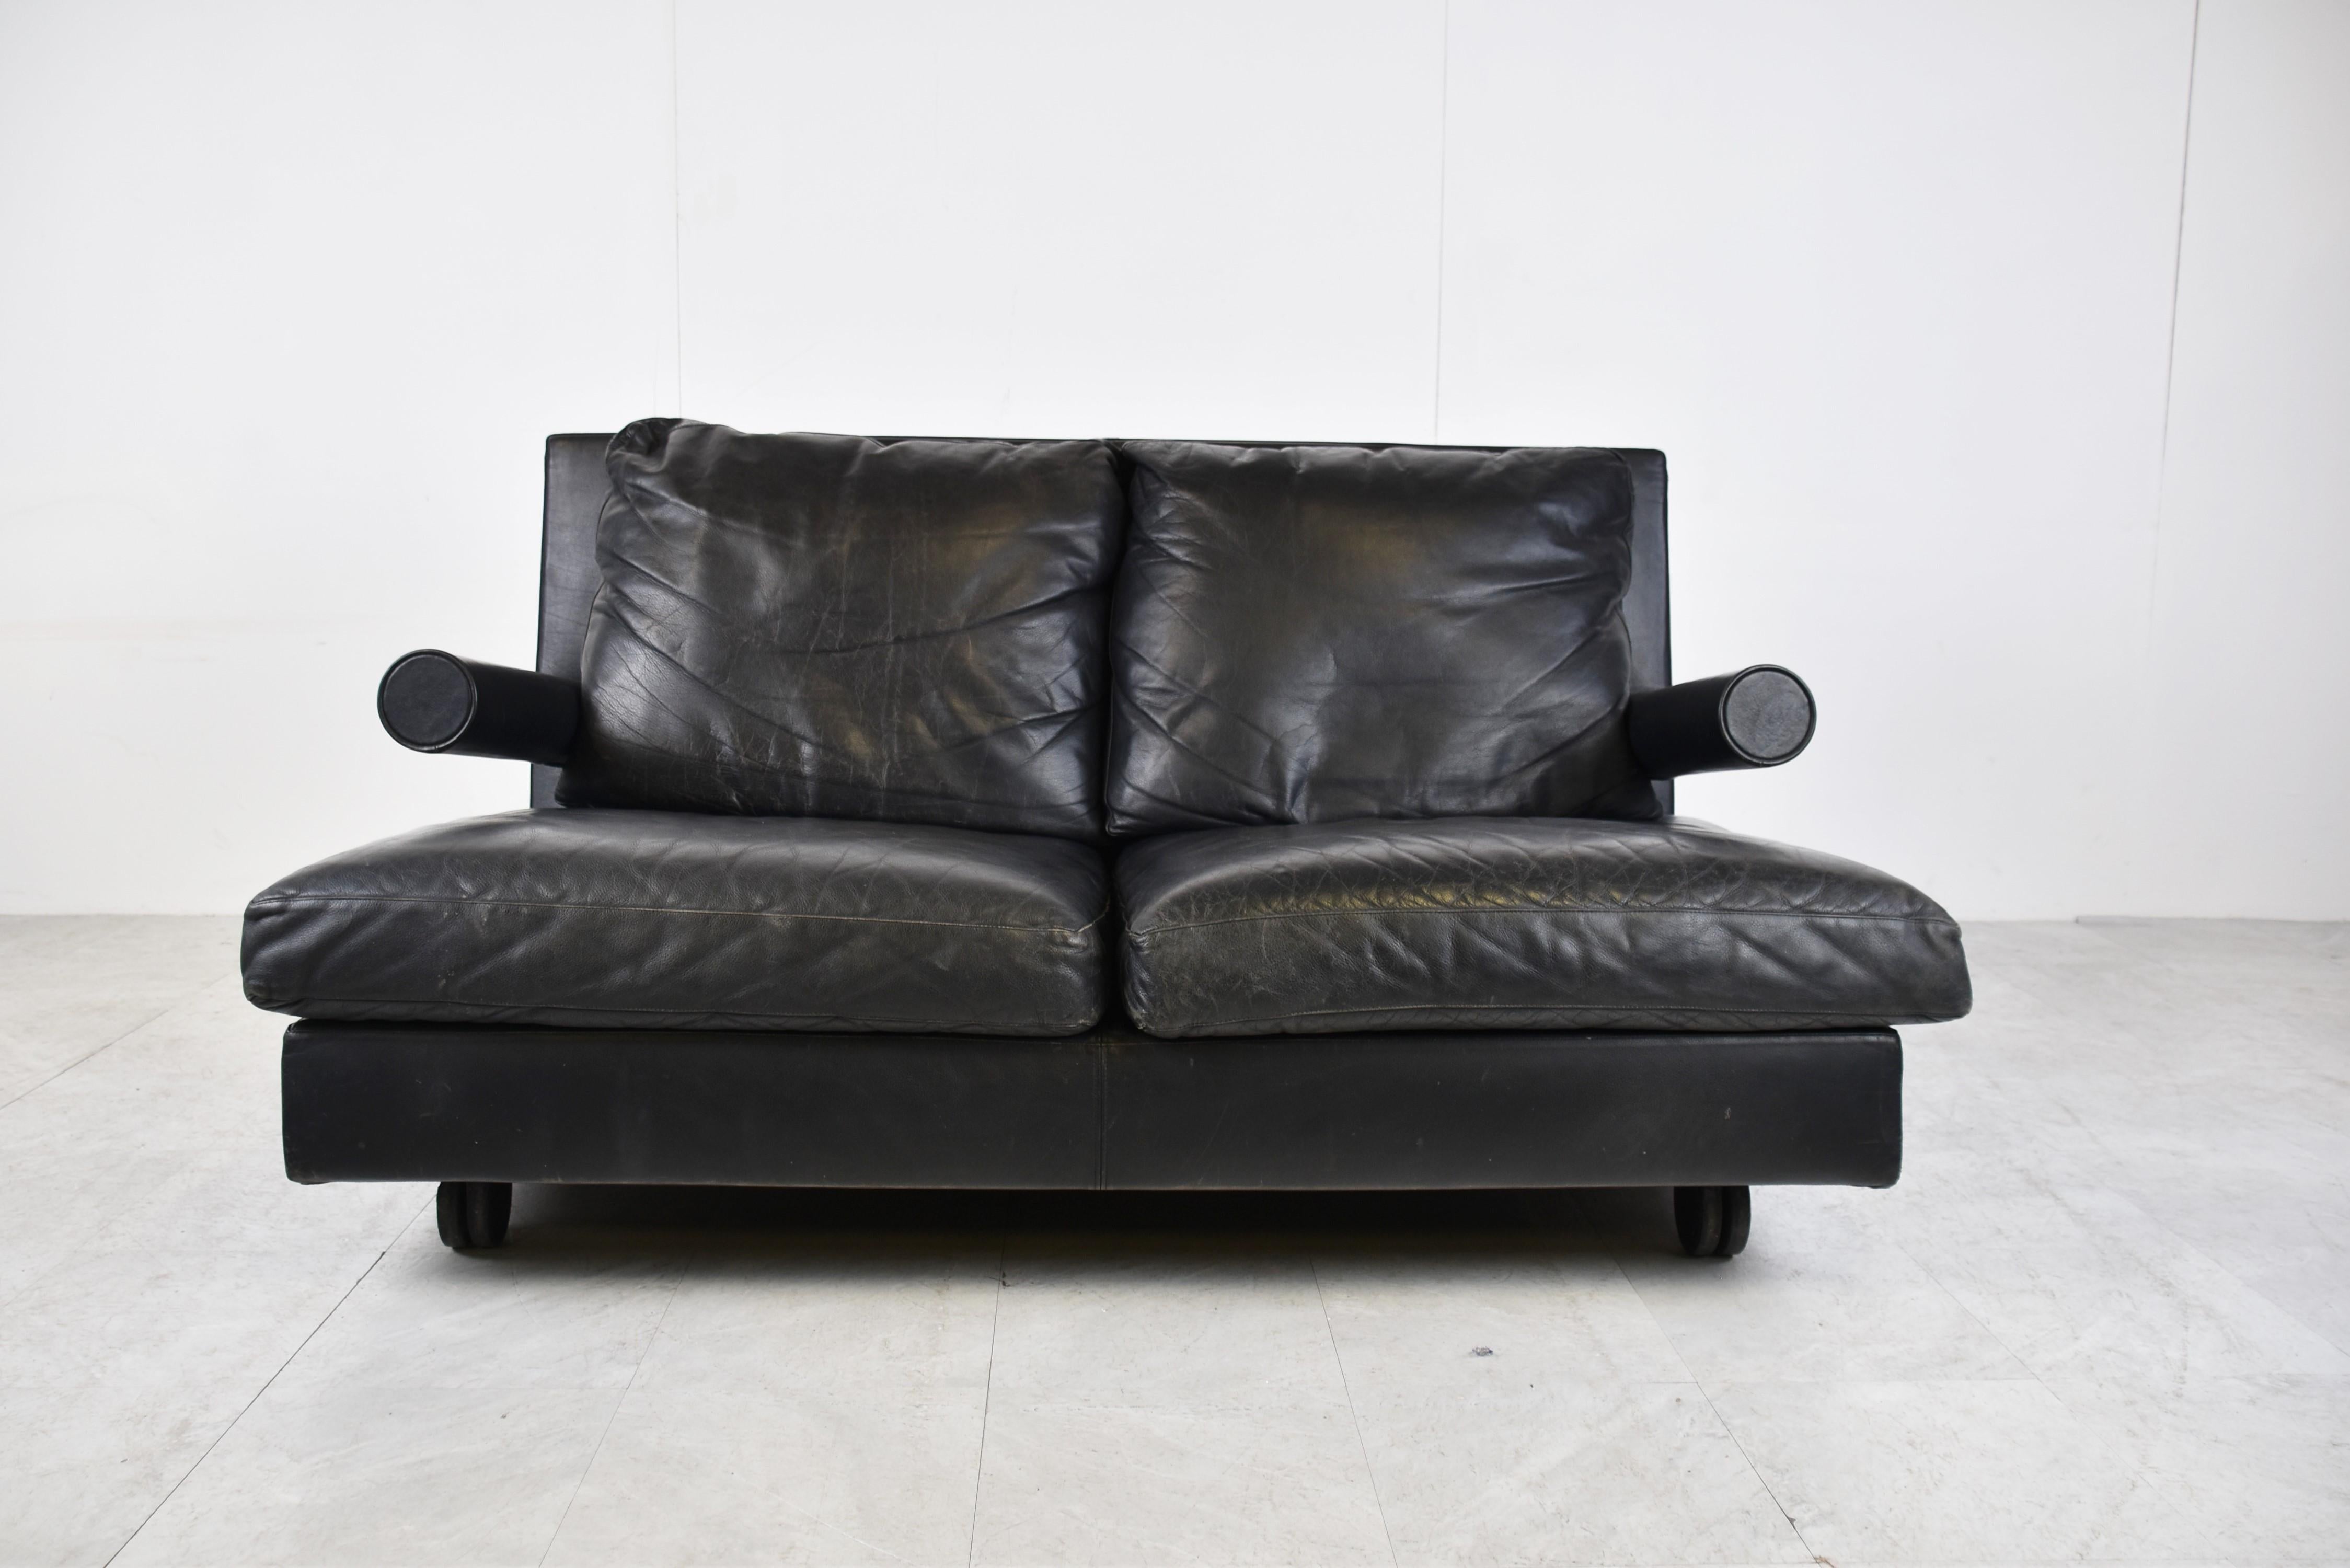 Rare vintage 'Baisity' sofa designed by Antonio Citterio for B&B Italia.

This two seater sofa has the recognisable armrests, typical for this sofa.

Original leather.

Good overall condition

1980s - Italy

Dimensions: 
Width: